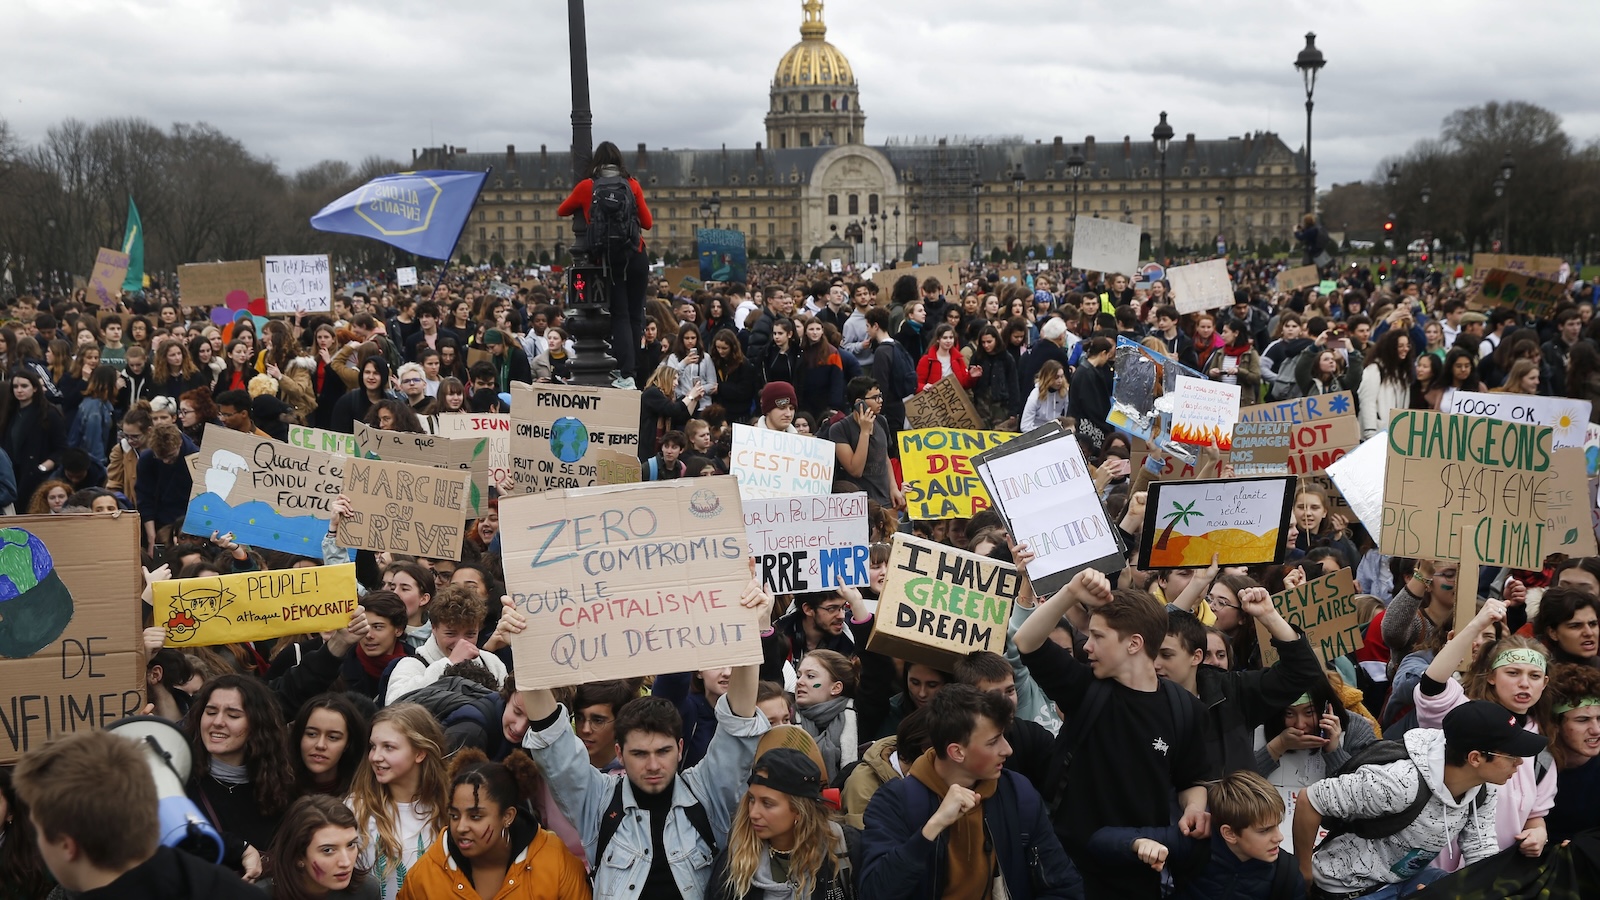 Hindreds of youth climate activists hold banners during a demonstration demanding action to address climate change on March 15, 2019 in Paris.